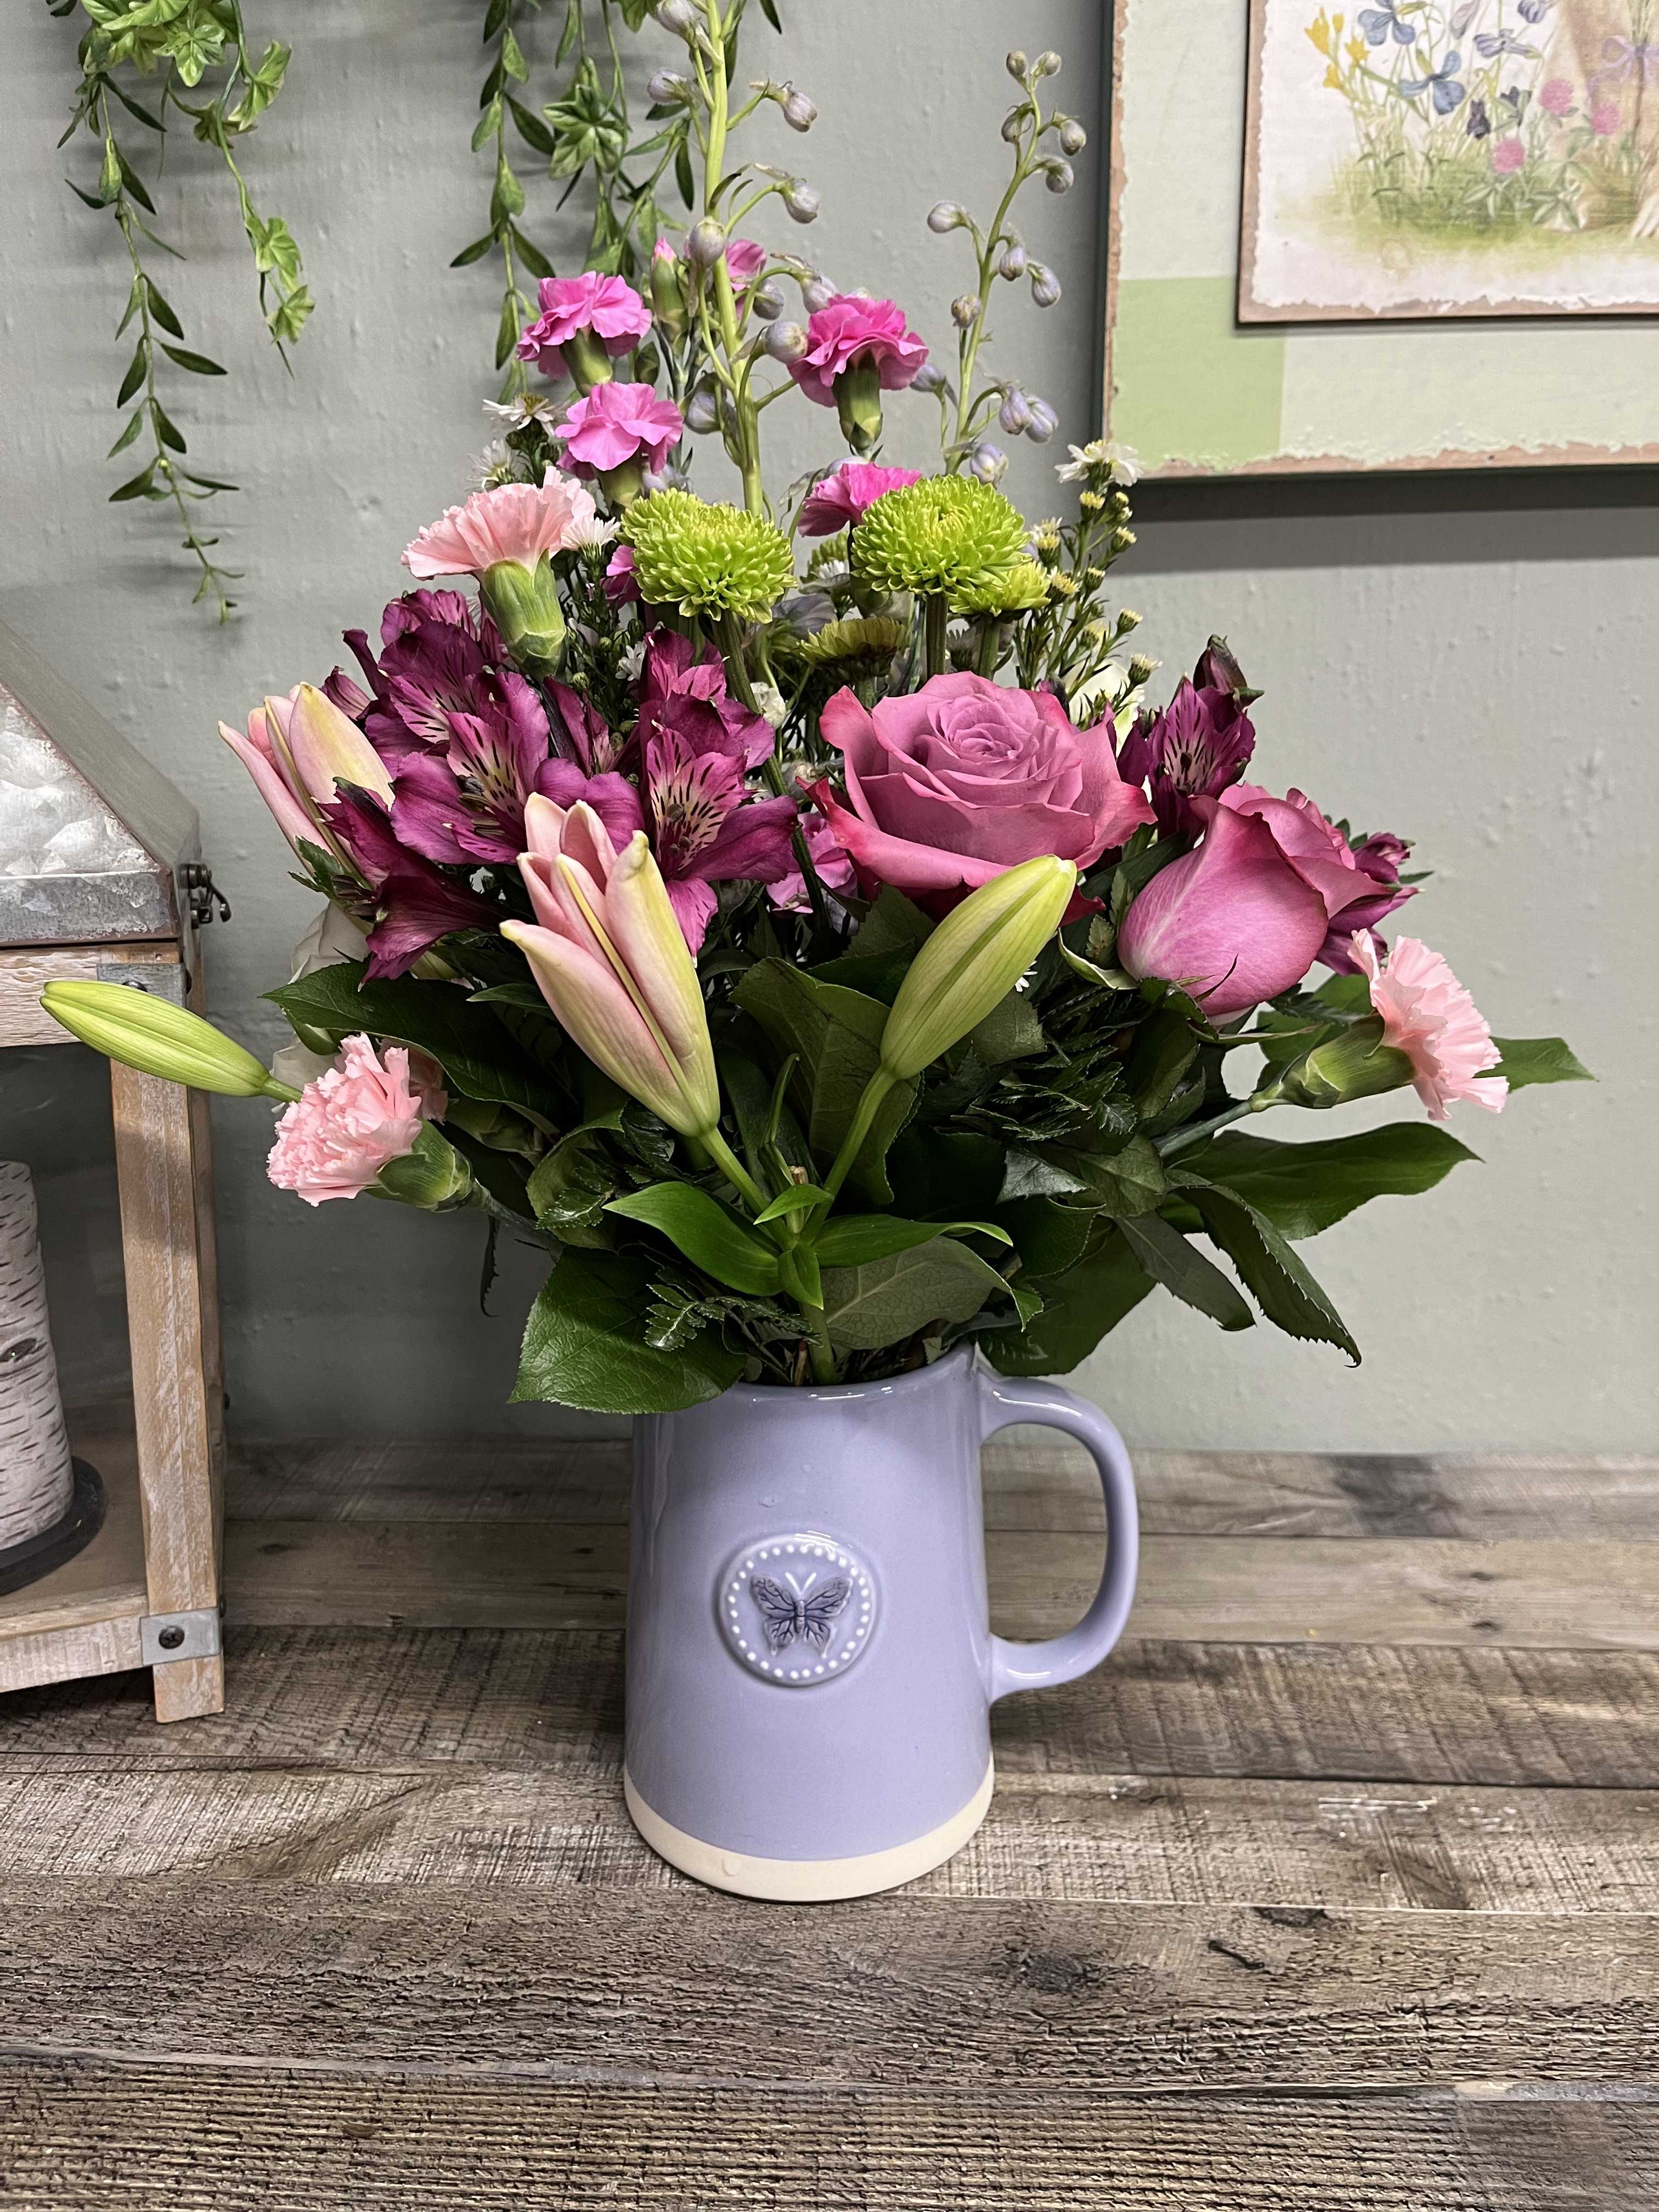 Sweetest Flutter - This cute ceramic pitcher with an embossed butterfly on the front is filled with our freshest blooms in designer’s choice of colors and styles. This keepsake container is a lovely gift for a special thank you, or for that special person in your life.  Makes a lovely gift, the keepsake pitcher is versatile for year round use. An all around design. 